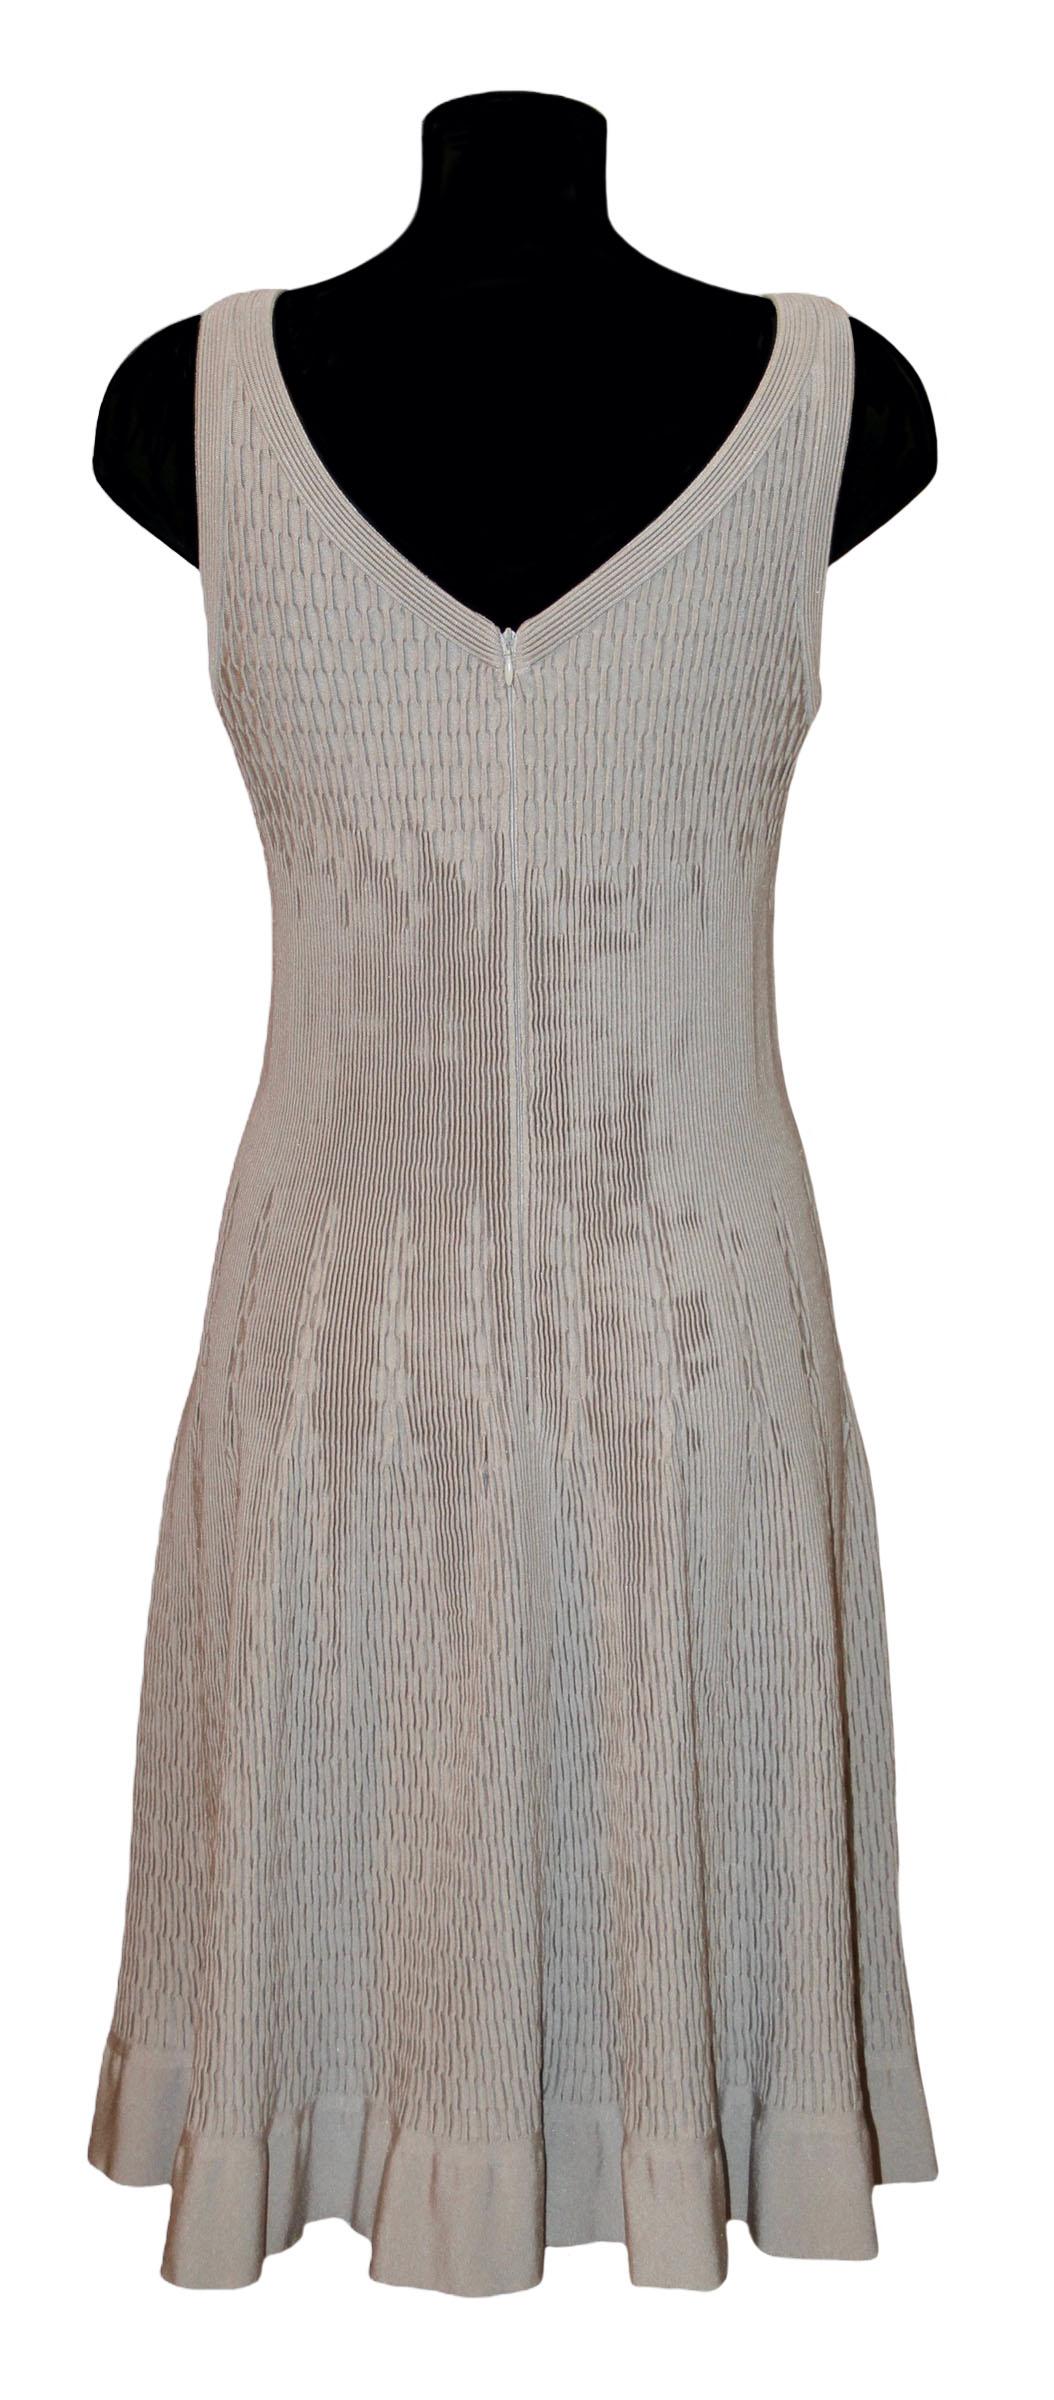 This pre-owned flare sleeveless dress from Azzedine Alaïa is a timeless shape and design.
It is crafted in a delicate greige color knit mesh fabric. The neckline is V-shape and the waist is fitted.

Fabric: 60% viscose, 25% nylon, 10% polyester, 5%